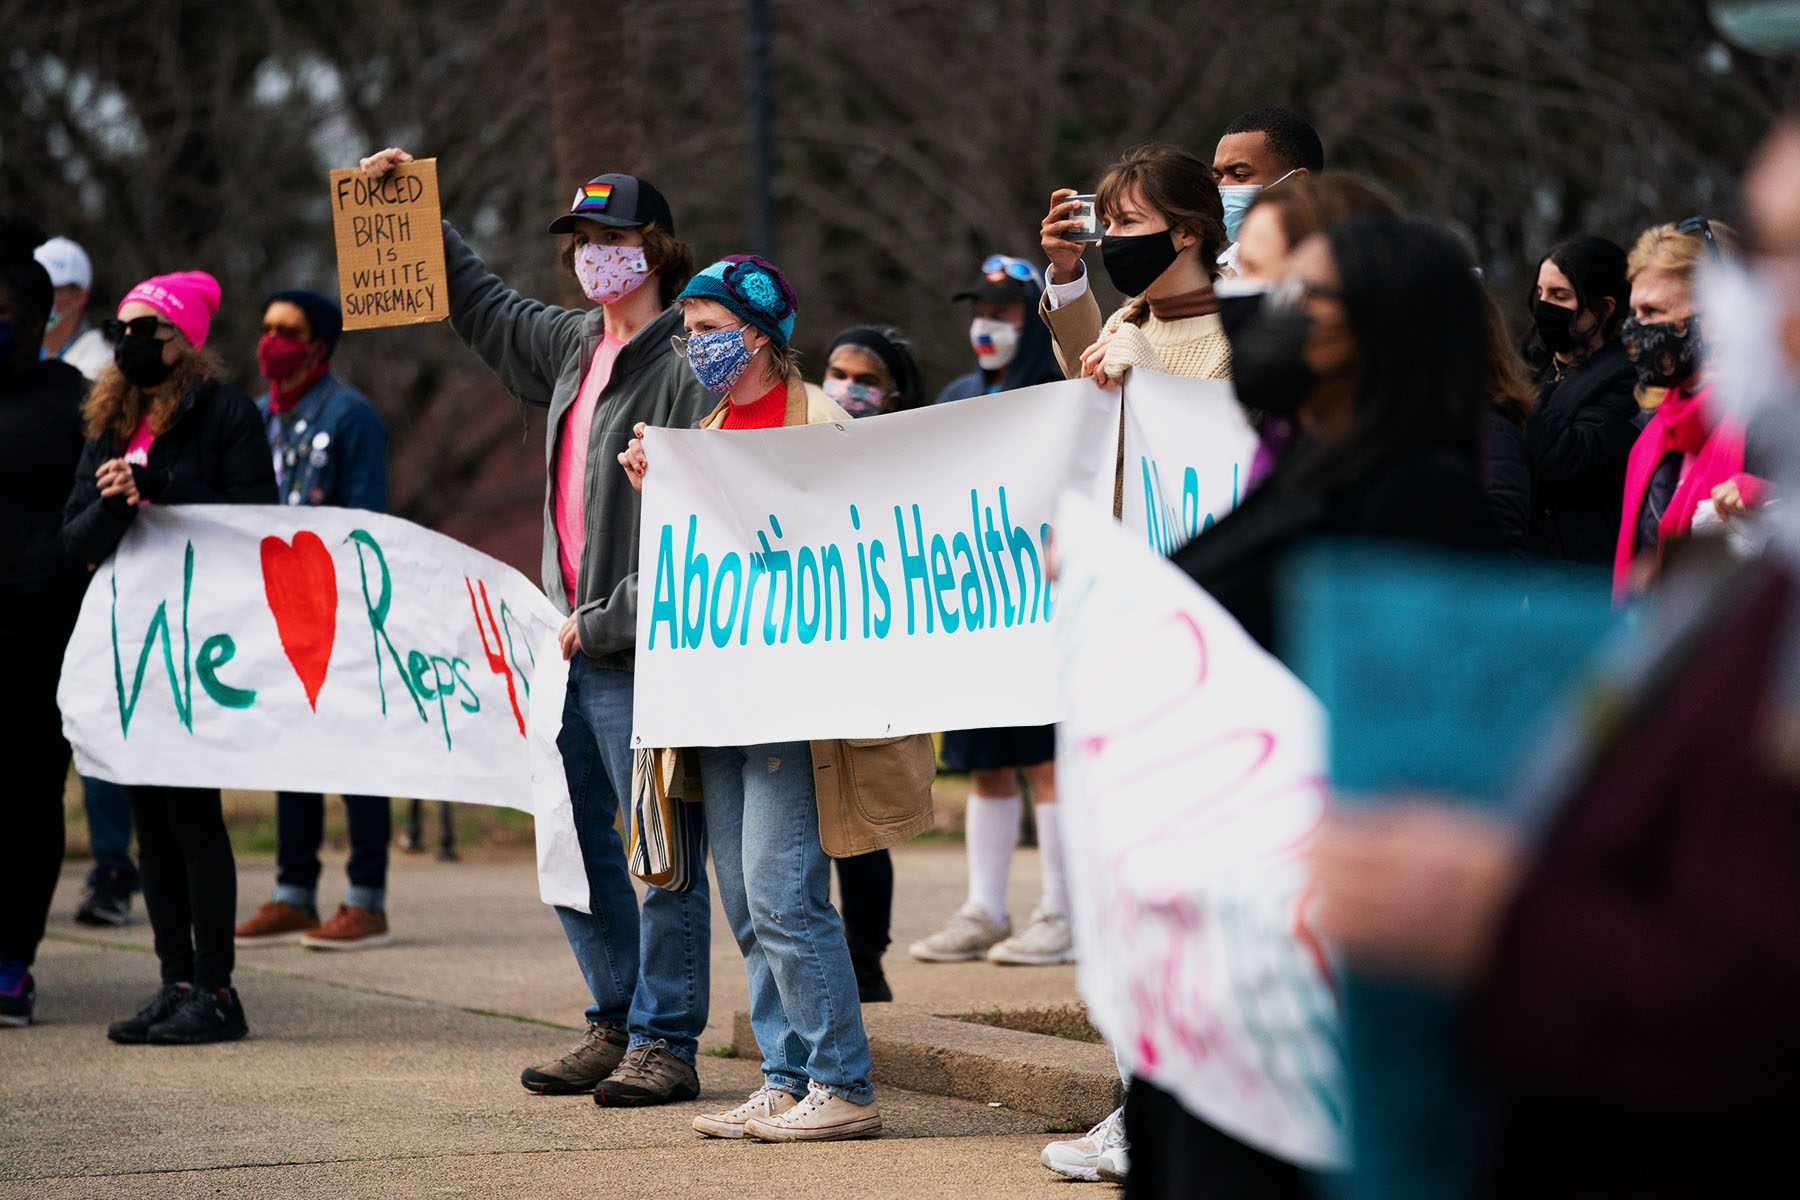 Demonstrators hold signs during a protest against an anti-abortion bill. The signs read "Abortion is Healthcare" and "Forced Birth is White Supremacy."